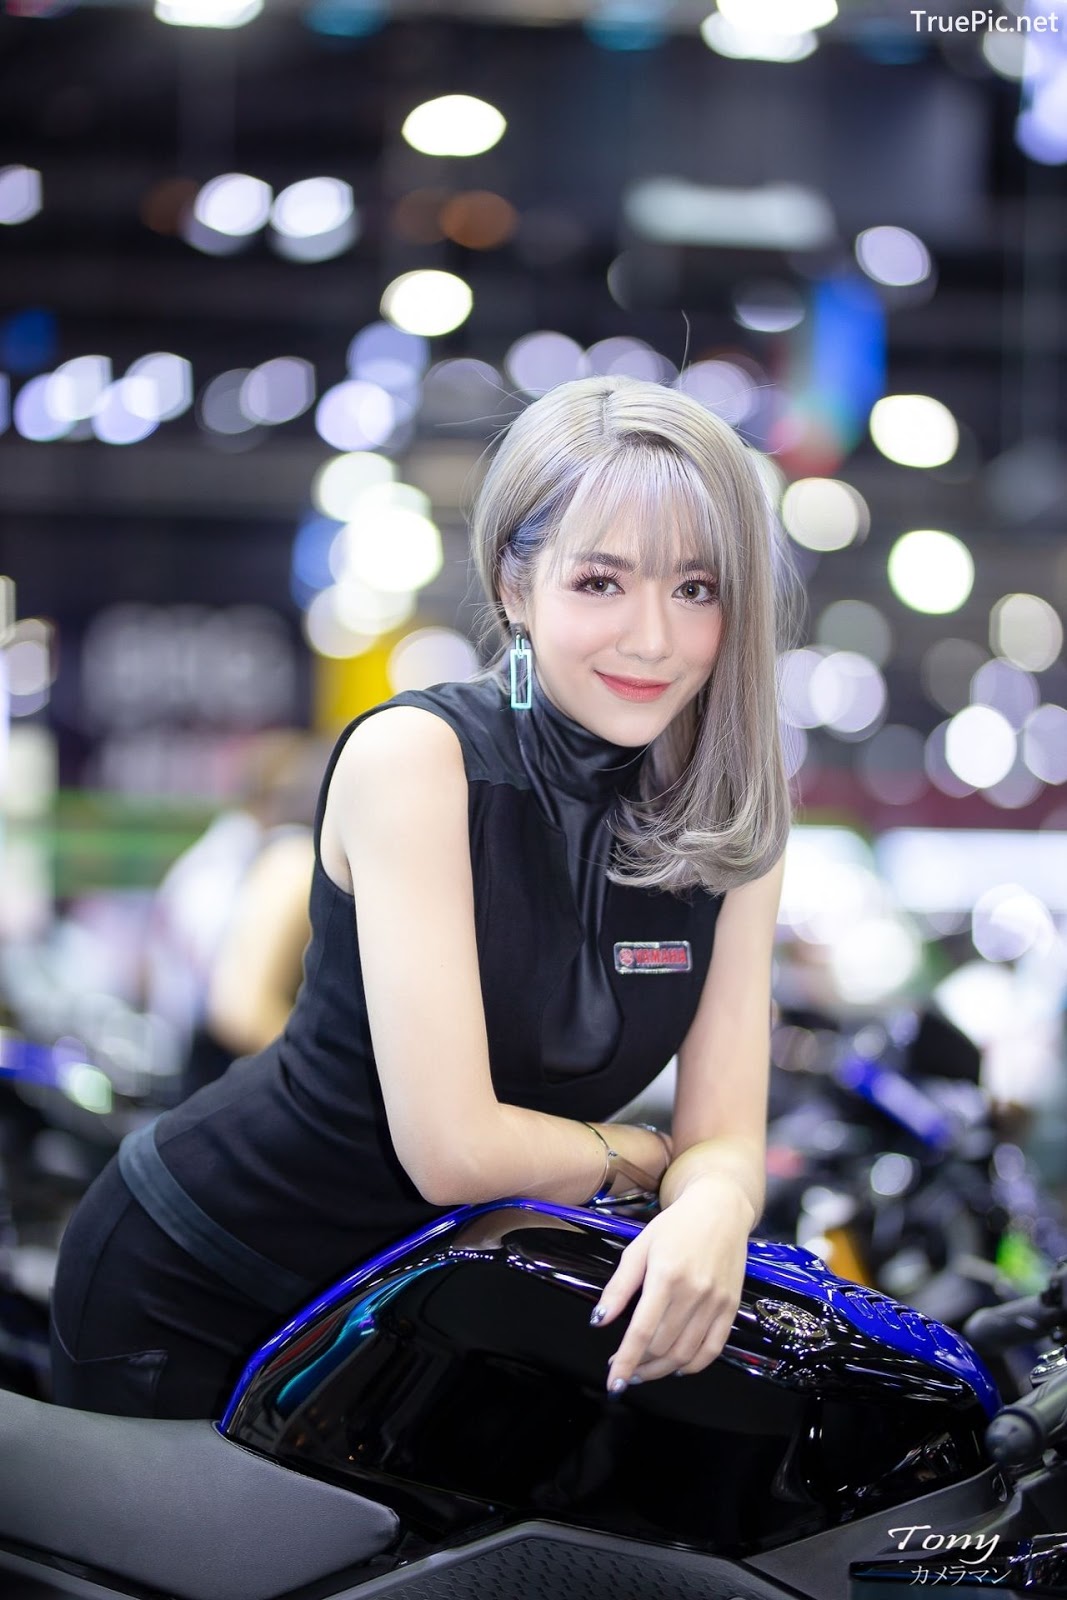 Image-Thailand-Hot-Model-Thai-Racing-Girl-At-Motor-Expo-2019-TruePic.net- Picture-41